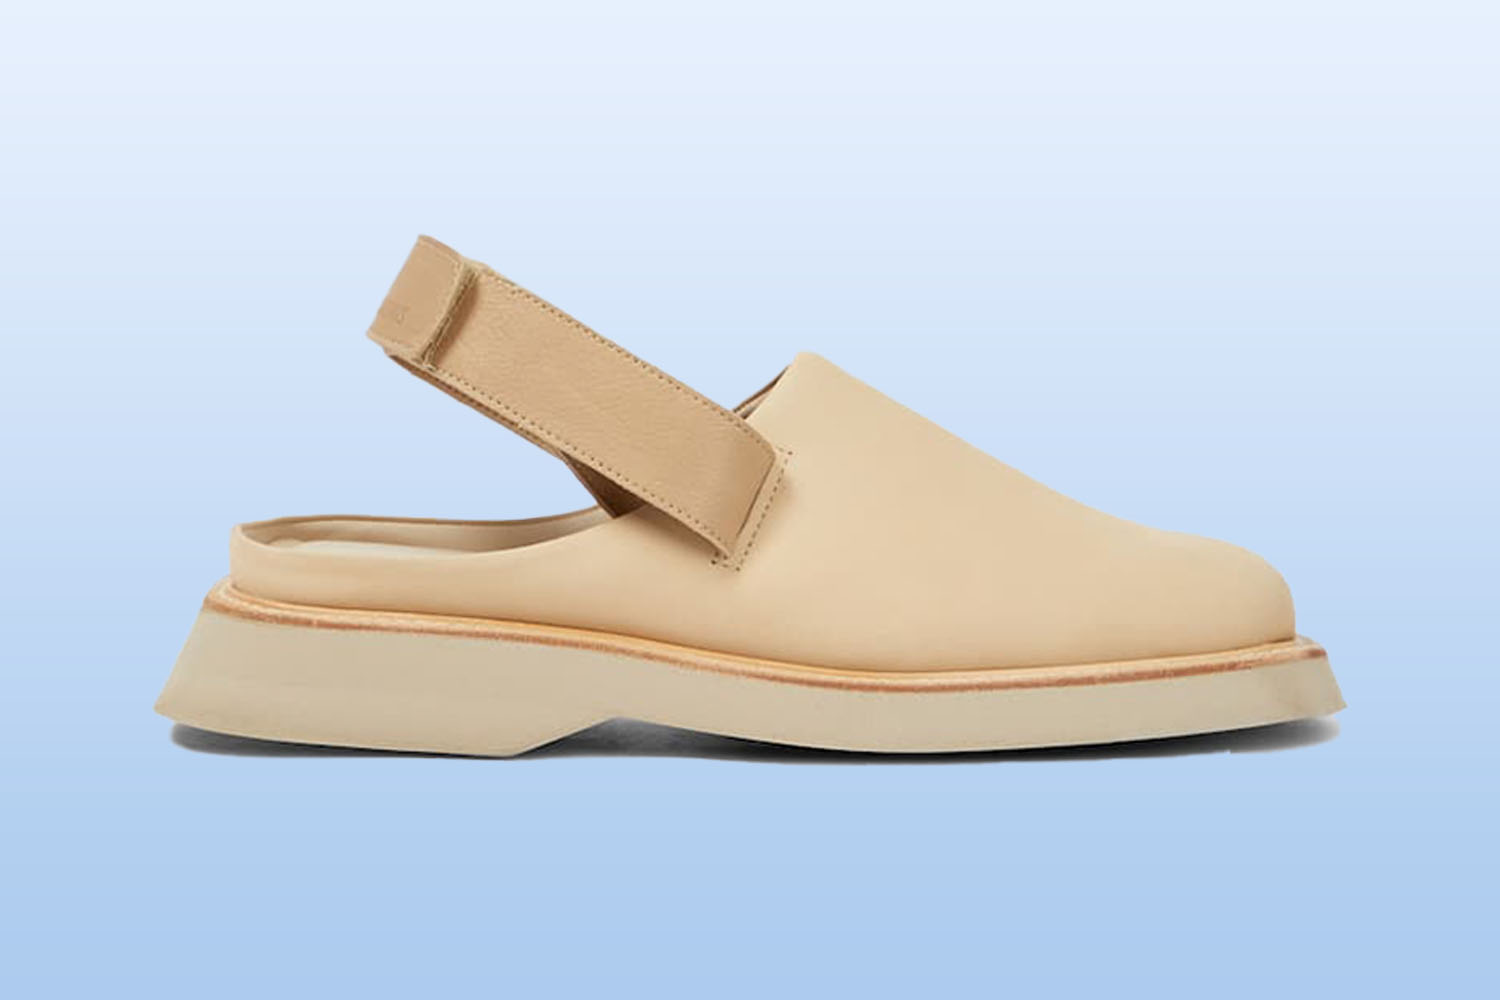 A pair of beige leather mules from mytheresa on a light blue background